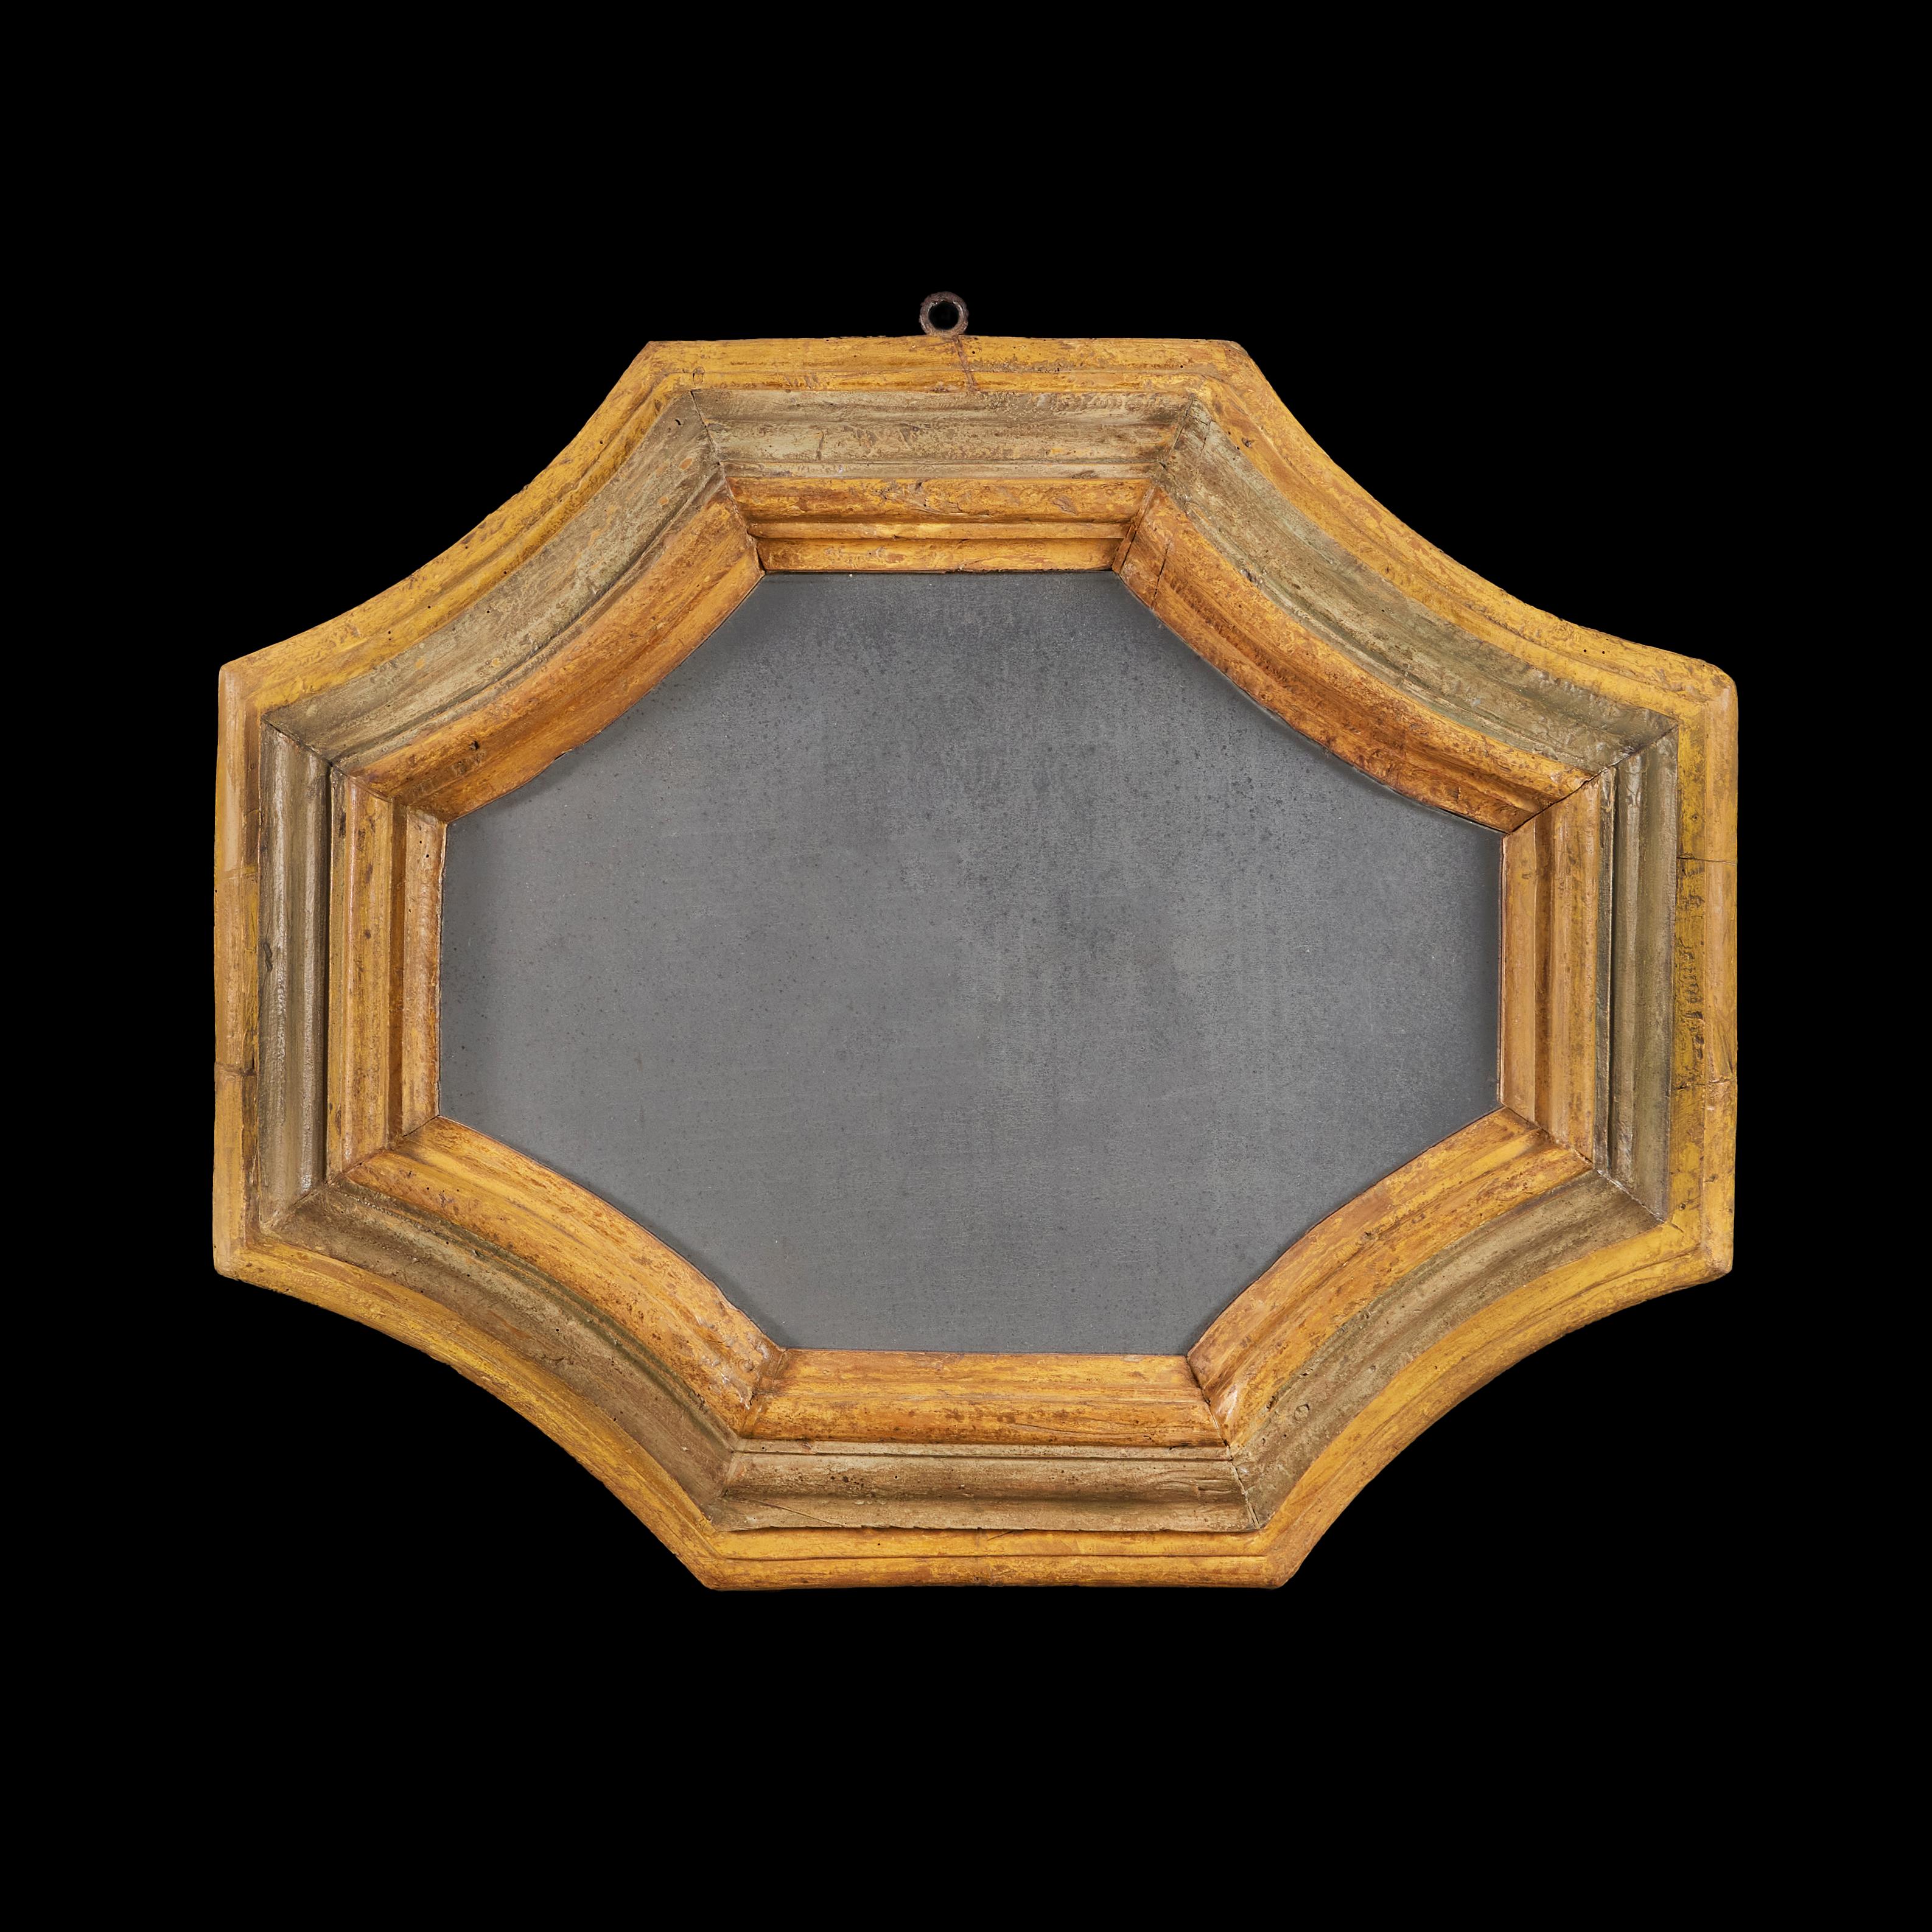 Italy, circa 1750

A rare pair of mid eighteenth century Tuscan octagonal frames, with residual traces of green paint and yellow ochre, the frames with graduated mouldings. 

Height    78.00cm
Width      94.00cm
Depth      7.00cm